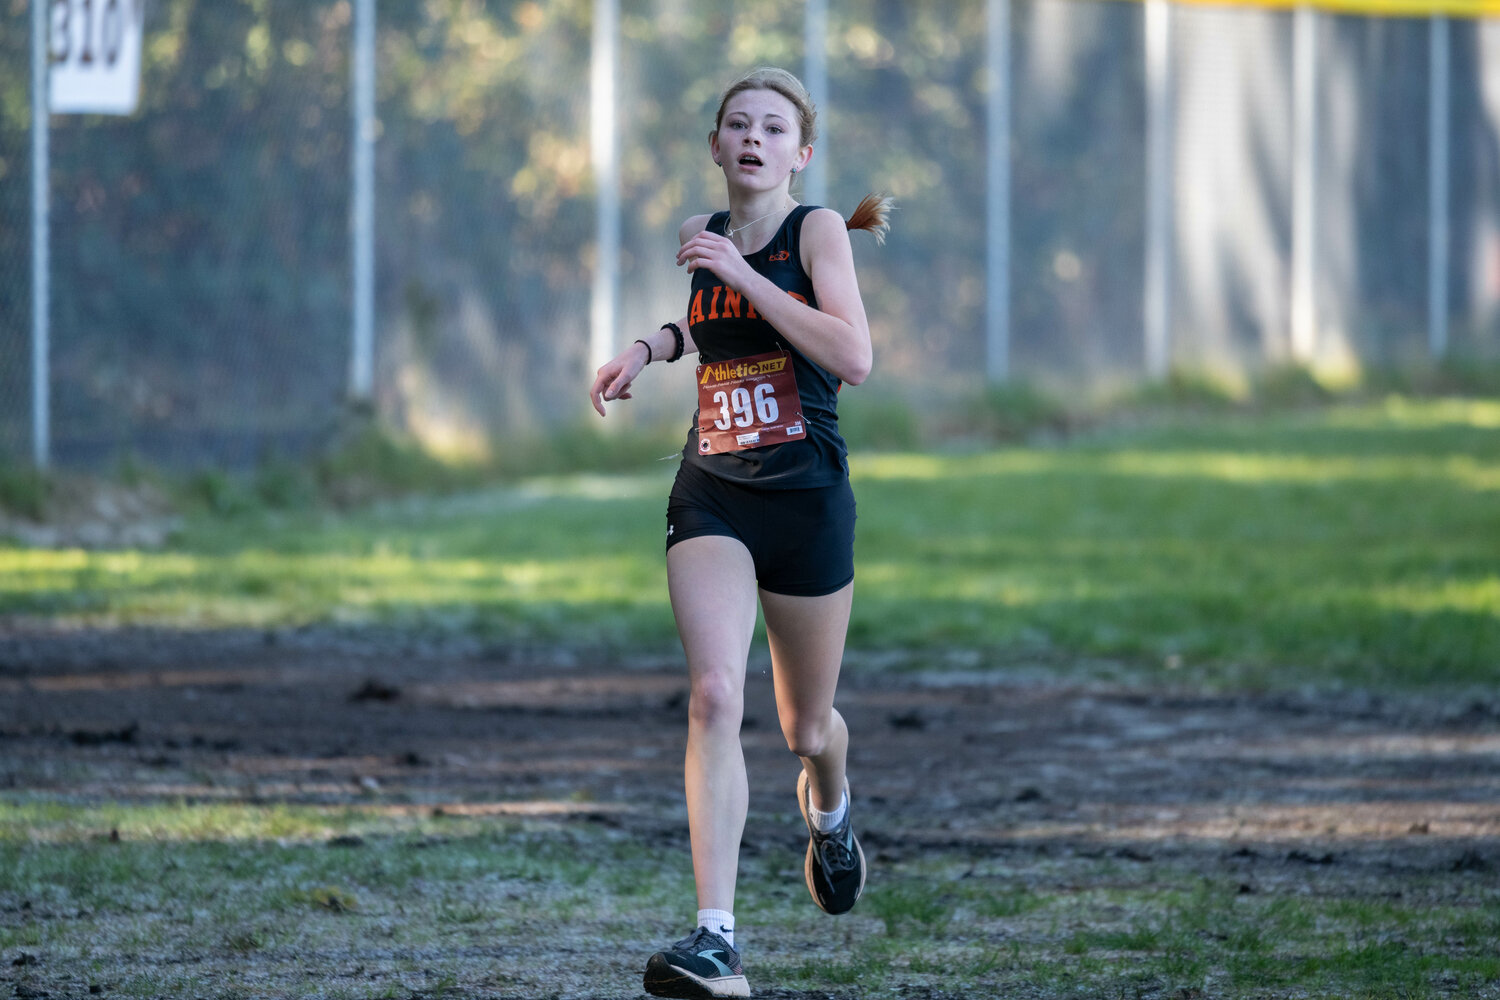 Rayanna Wisner finishes third in the girls' race at the 1B/2B District 4 cross country championship meet on Oct. 28 in Rainier.